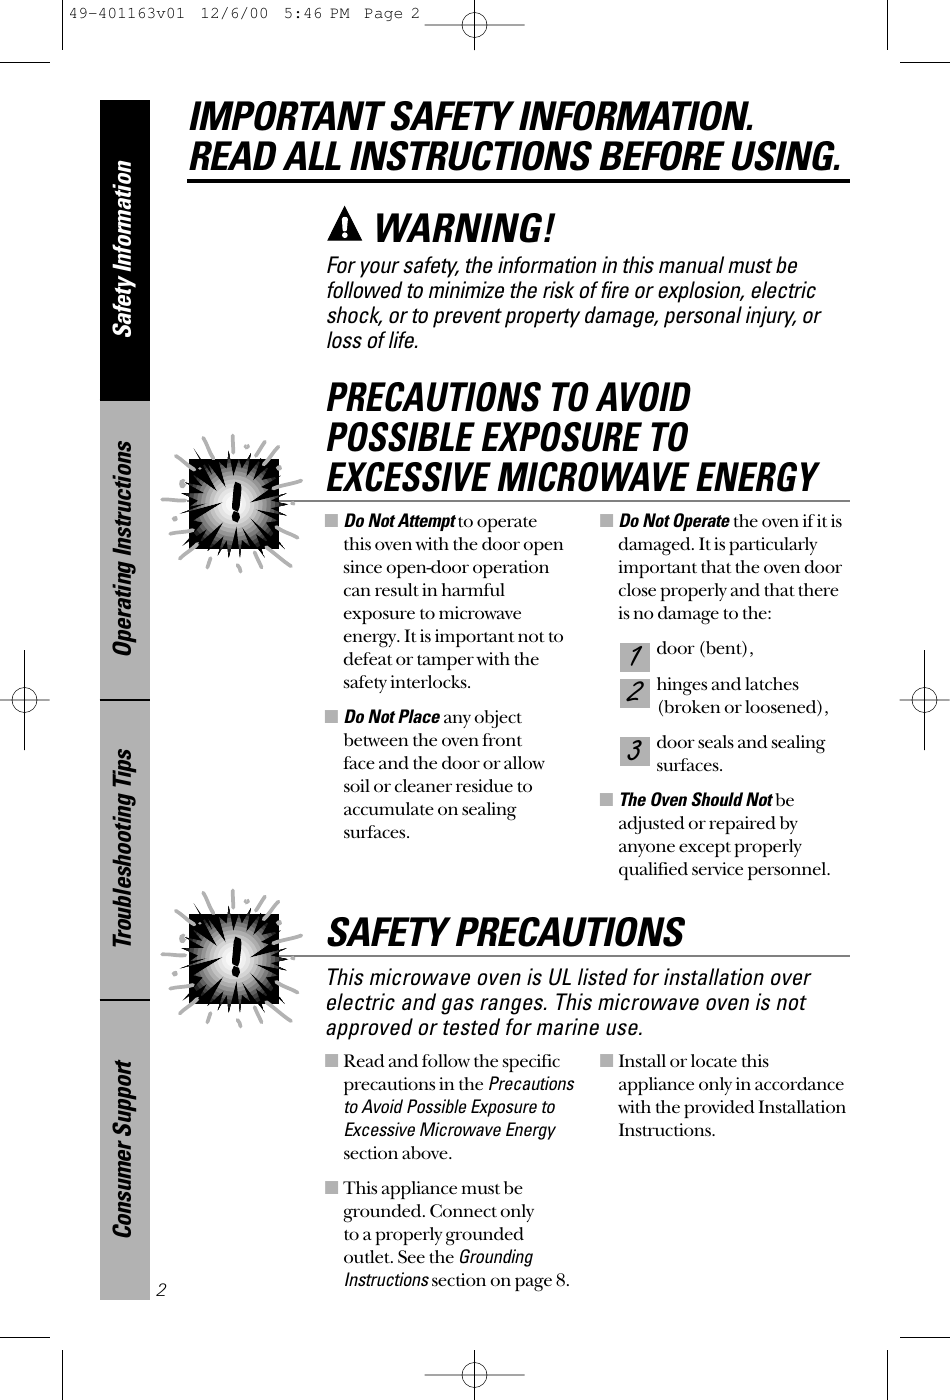 ■Read and follow the specificprecautions in the Precautionsto Avoid Possible Exposure toExcessive Microwave Energysection above.■This appliance must begrounded. Connect only to a properly grounded outlet. See the GroundingInstructionssection on page 8.■Install or locate this appliance only in accordancewith the provided InstallationInstructions.■Do Not Attemptto operate this oven with the door opensince open-door operationcan result in harmfulexposure to microwaveenergy. It is important not todefeat or tamper with thesafety interlocks.■Do Not Place any objectbetween the oven front face and the door or allowsoil or cleaner residue toaccumulate on sealing surfaces.■Do Not Operate the oven if it isdamaged. It is particularlyimportant that the oven doorclose properly and that thereis no damage to the:door (bent),hinges and latches (broken or loosened),door seals and sealingsurfaces.■The Oven Should Not beadjusted or repaired by anyone except properlyqualified service personnel.321PRECAUTIONS TO AVOID POSSIBLE EXPOSURE TO EXCESSIVE MICROWAVE ENERGYSafety InformationOperating InstructionsTroubleshooting TipsConsumer SupportIMPORTANT SAFETY INFORMATION.READ ALL INSTRUCTIONS BEFORE USING.2For your safety, the information in this manual must be followed to minimize the risk of fire or explosion, electricshock, or to prevent property damage, personal injury, or loss of life.WARNING!This microwave oven is UL listed for installation overelectric and gas ranges. This microwave oven is notapproved or tested for marine use.SAFETY PRECAUTIONS49-401163v01  12/6/00  5:46 PM  Page 2